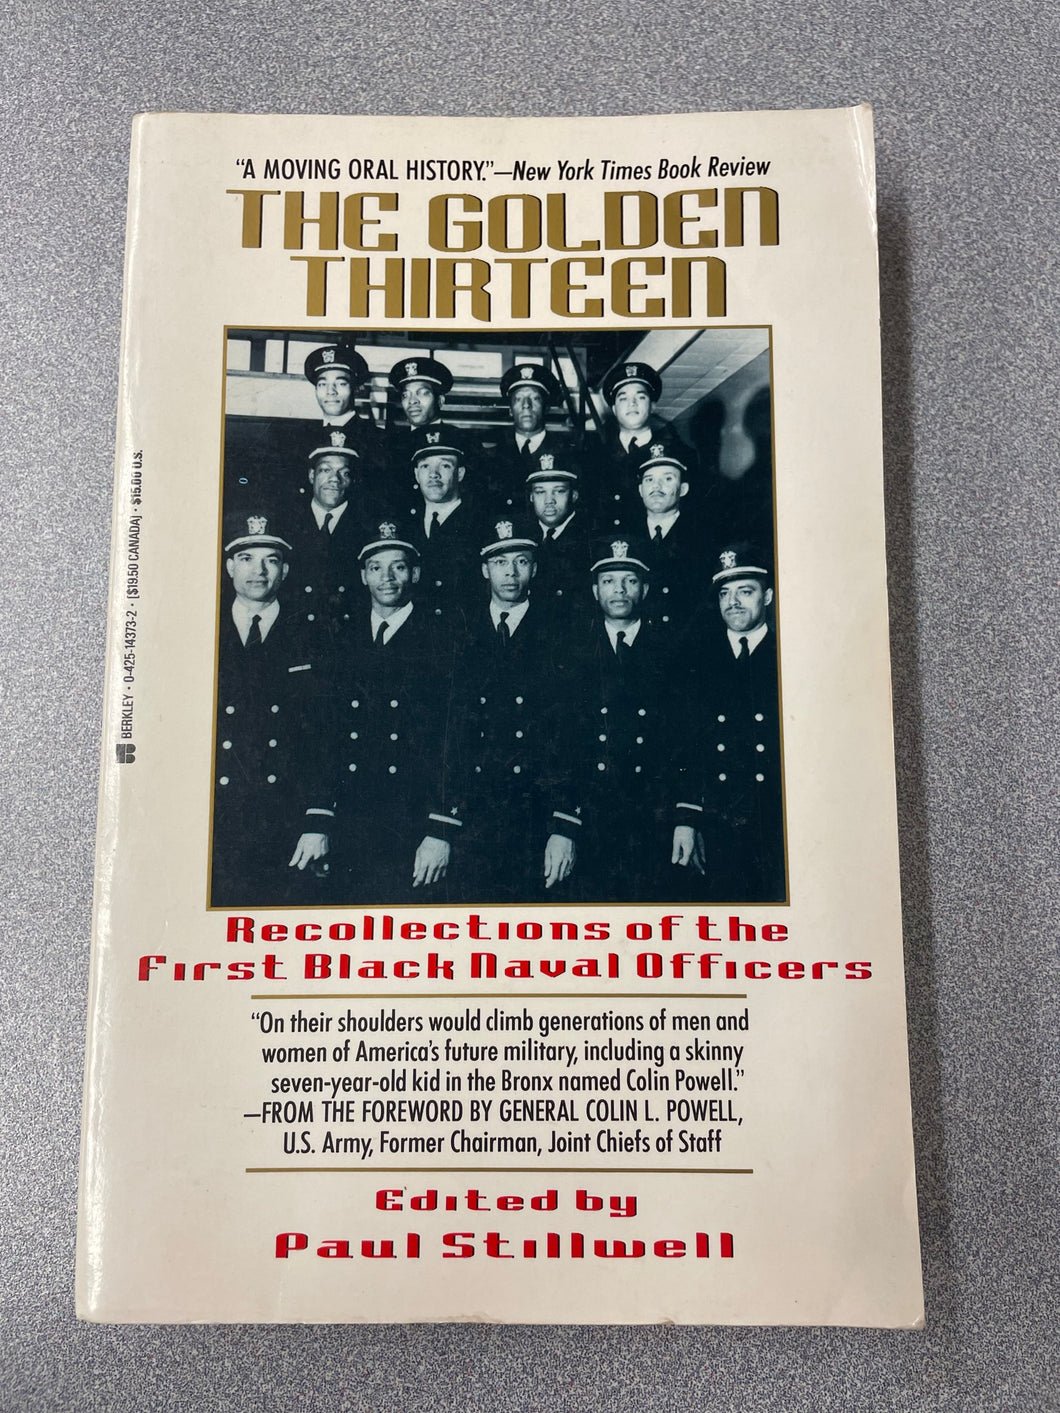 The Golden Thirteen: Recollections of the First Black Naval Officers, Stillwell, Paul, ed. [1993] BH 10/22